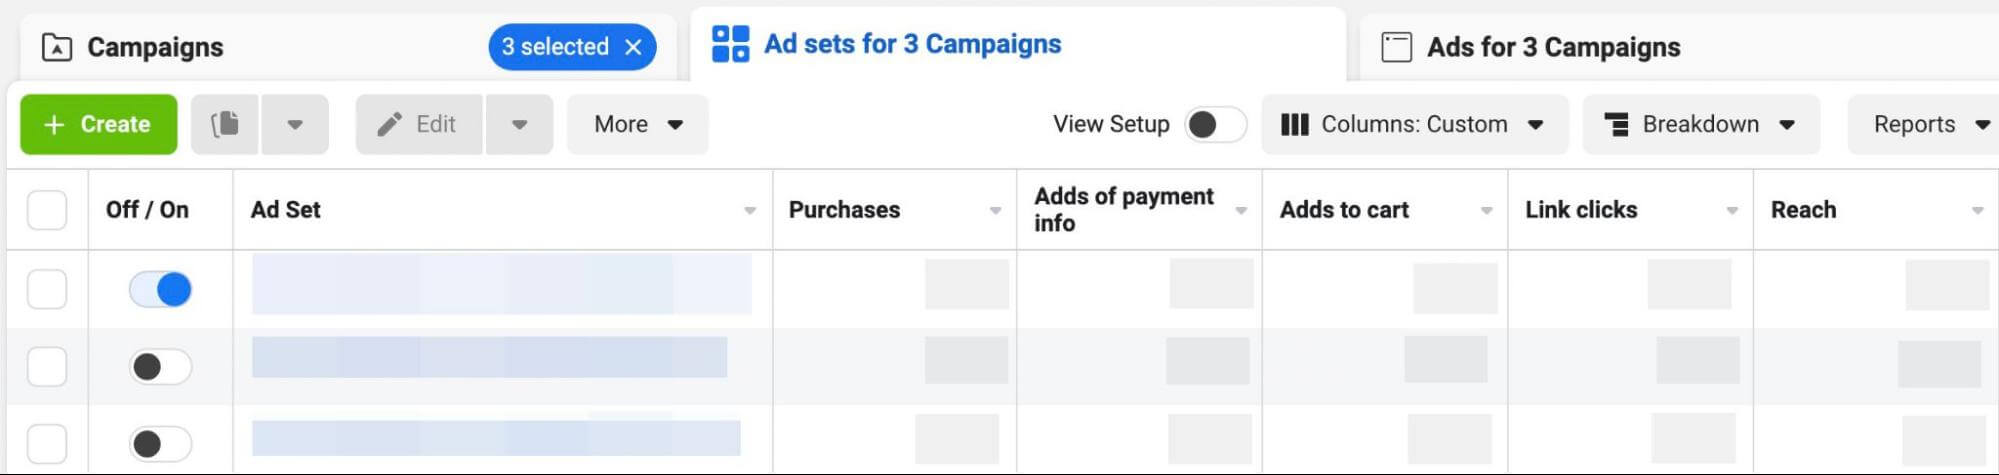 how-to-monitor-upper-funnel-metrics-for-facebook-ads-improve-campaigns-ad-to-cart-click-through-impression-metrics-drop-off-points-in-funnel-example-19